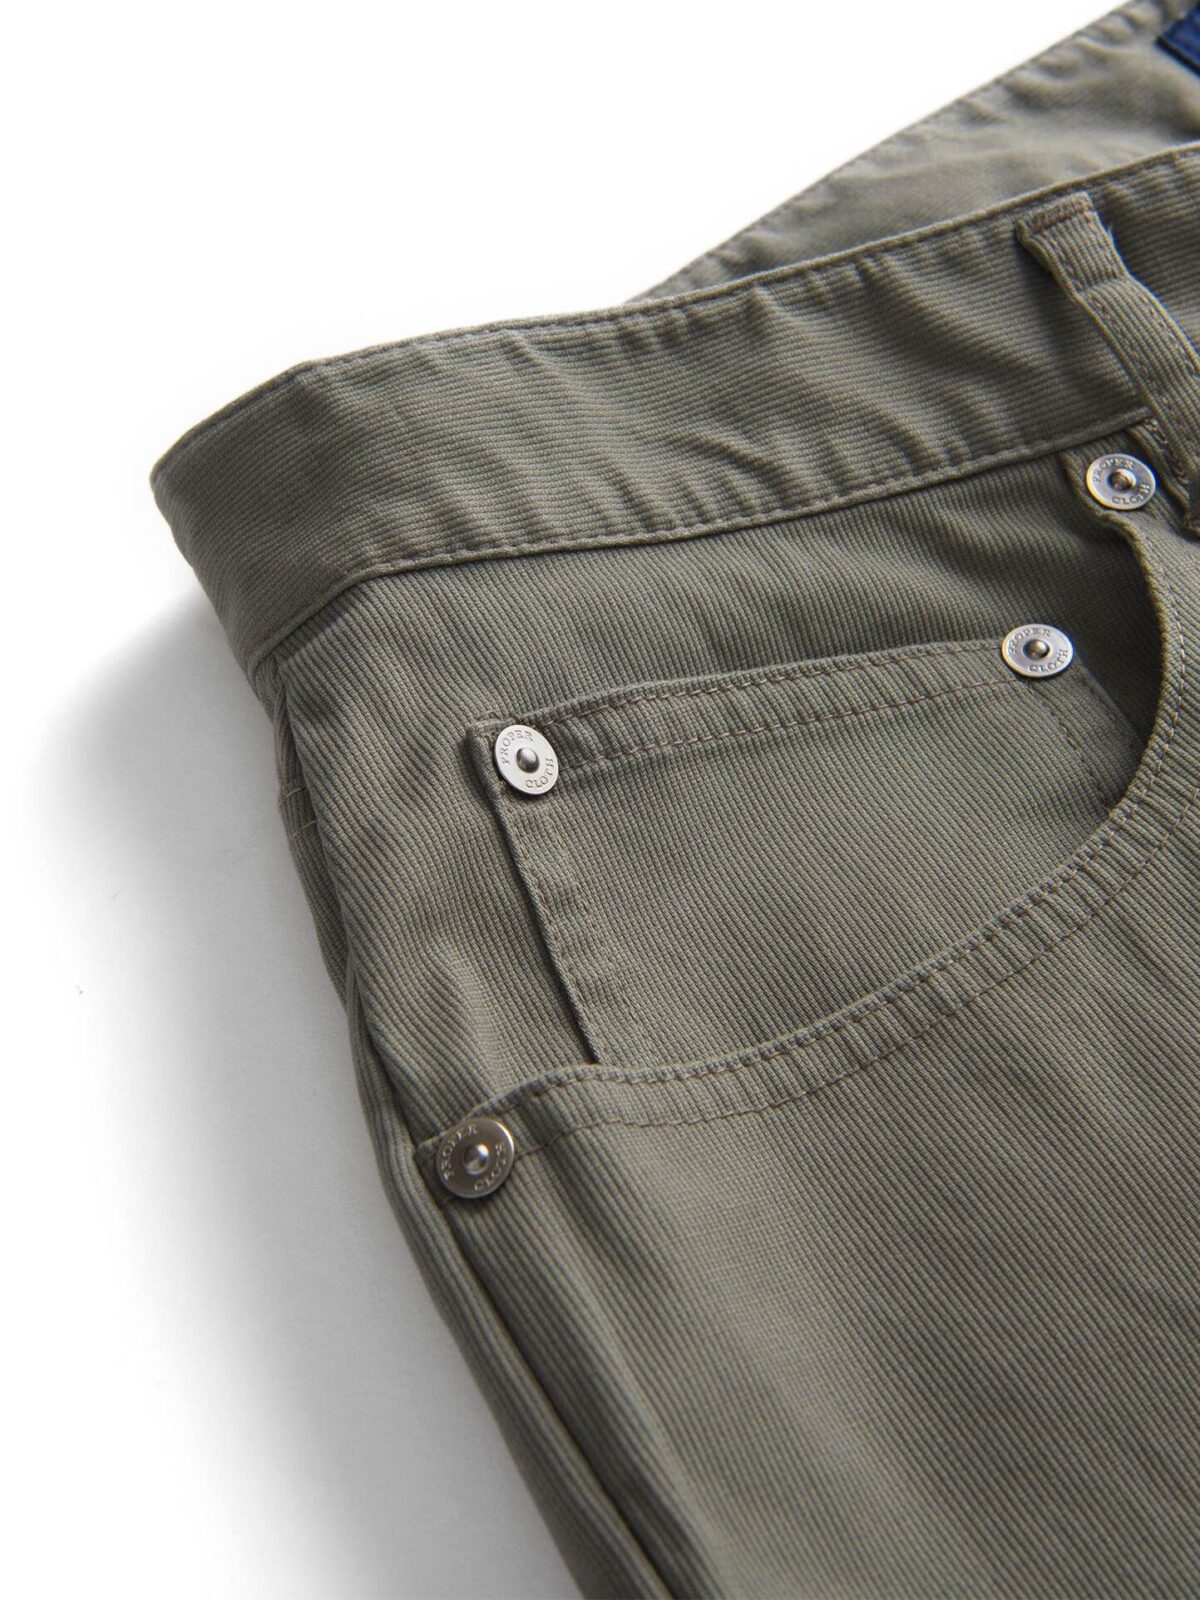 Faded Olive Bedford Cord Five Pocket Pants